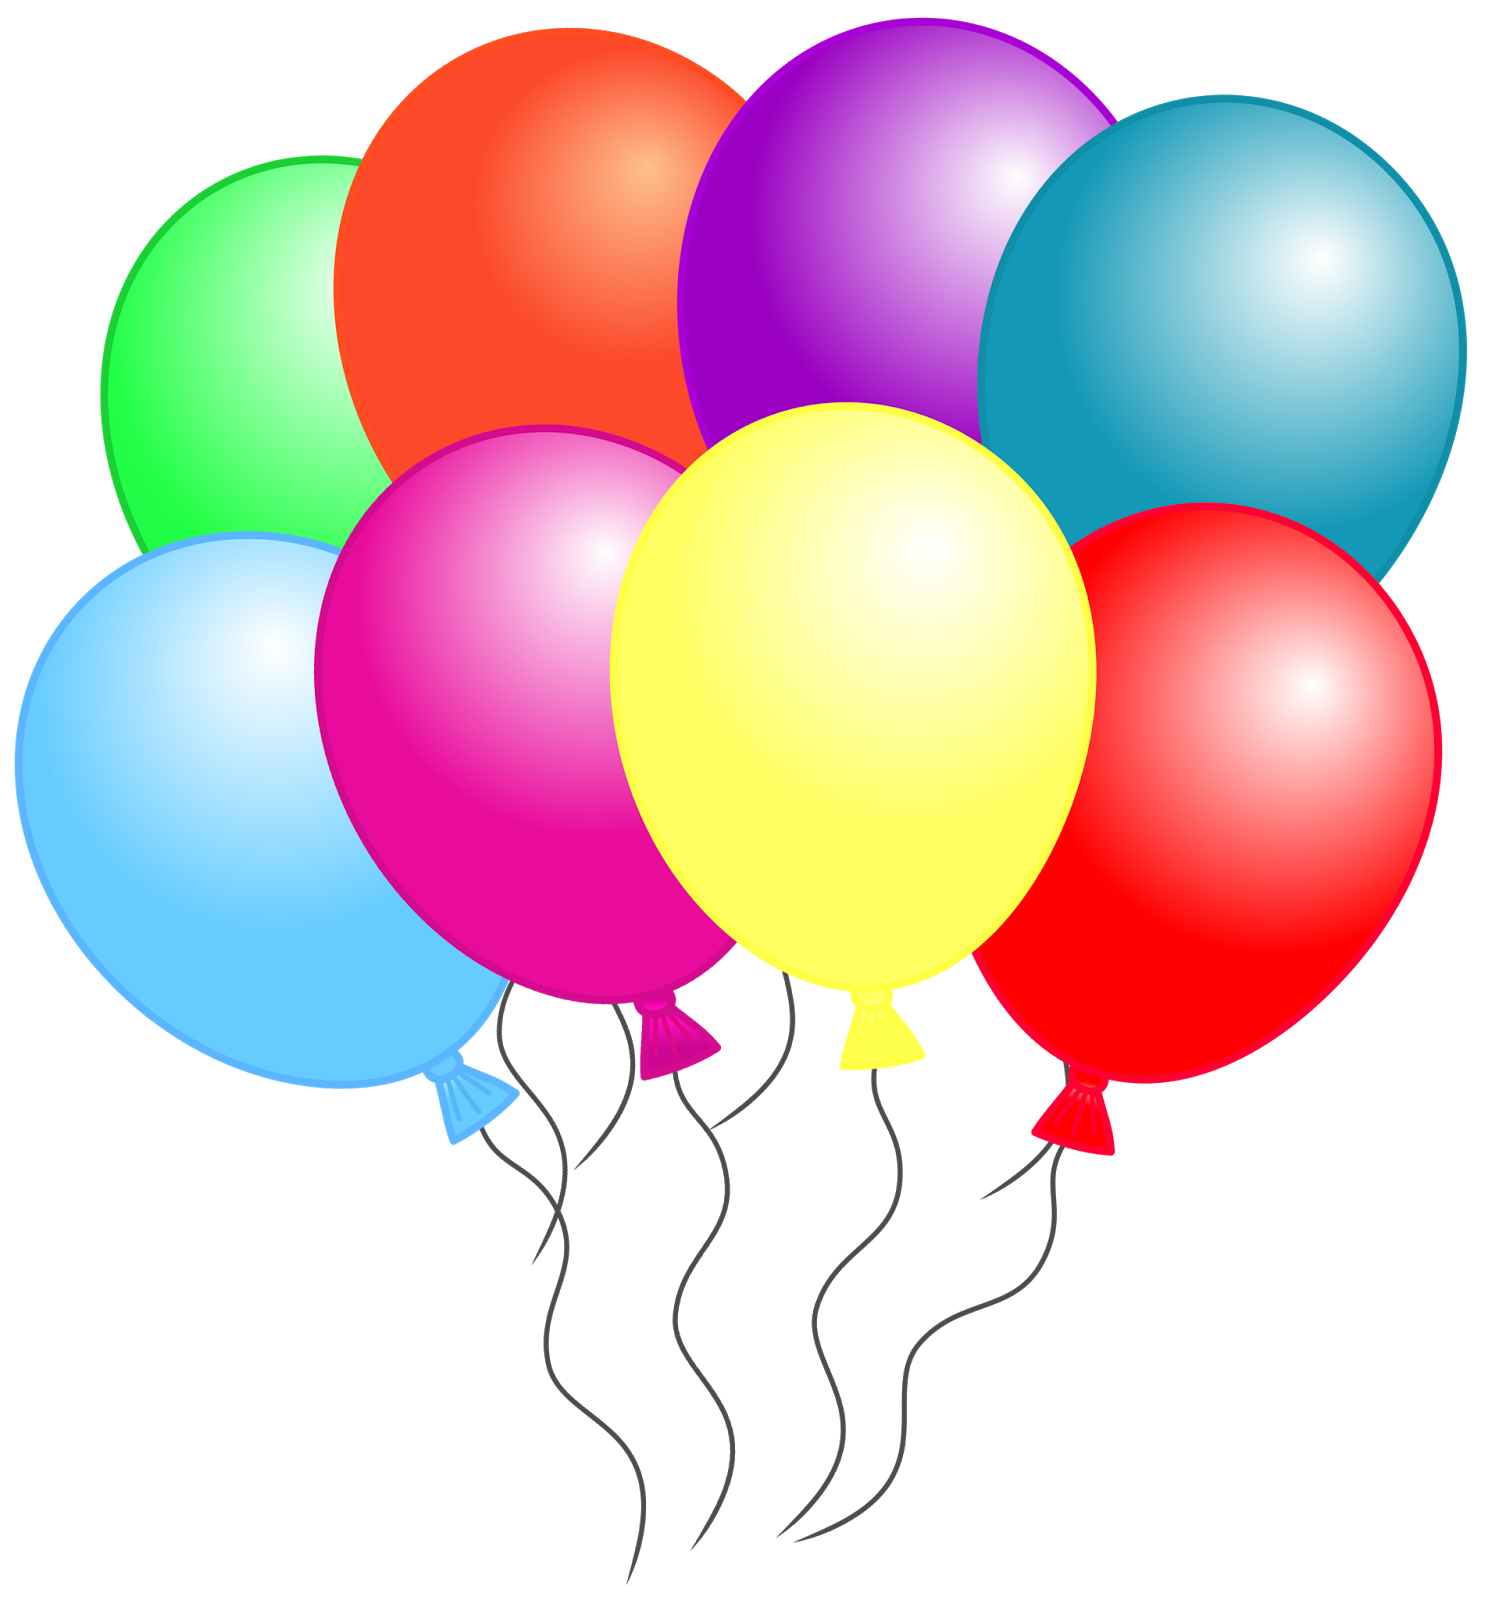 Balloon that can be. Student clipart birthday